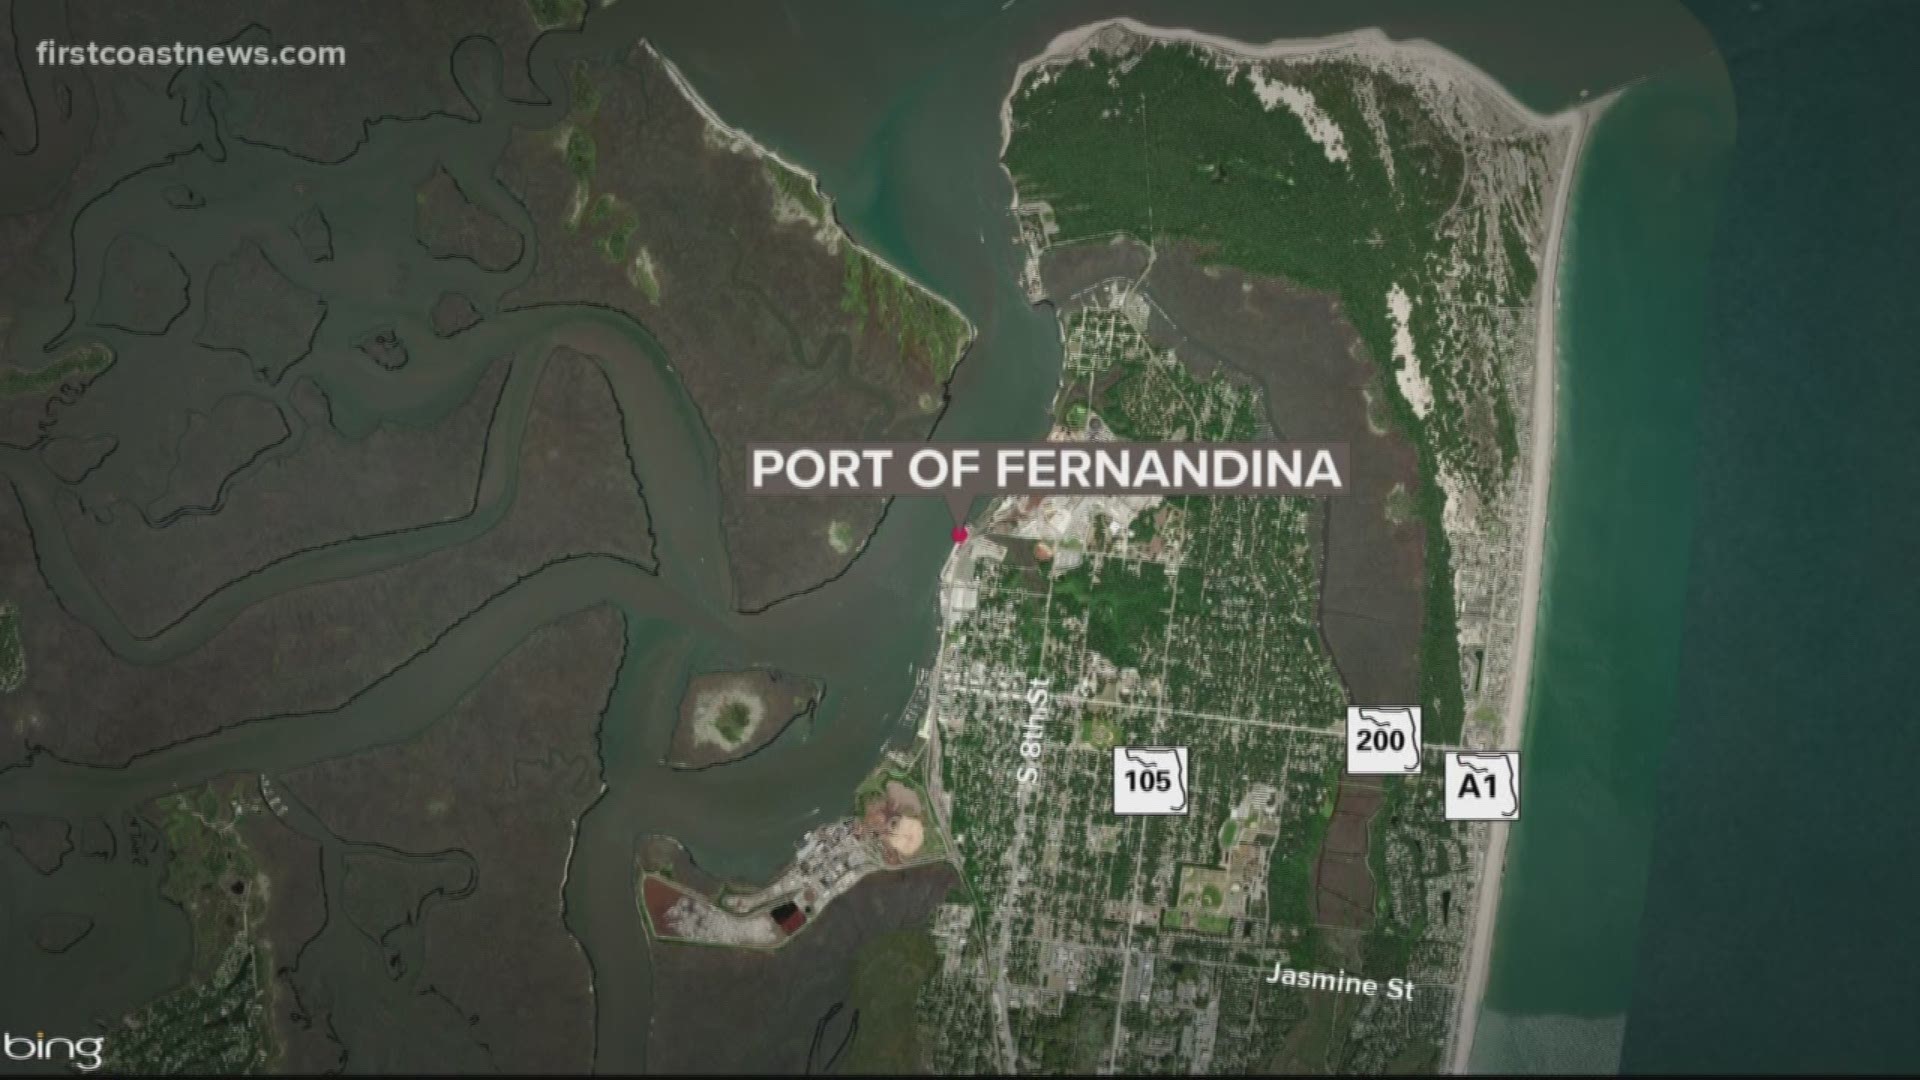 U.S. Representative John Rutherford announced the port will get $1.3 million to streamline the Fernandina Express barge service to other large east coast ports.